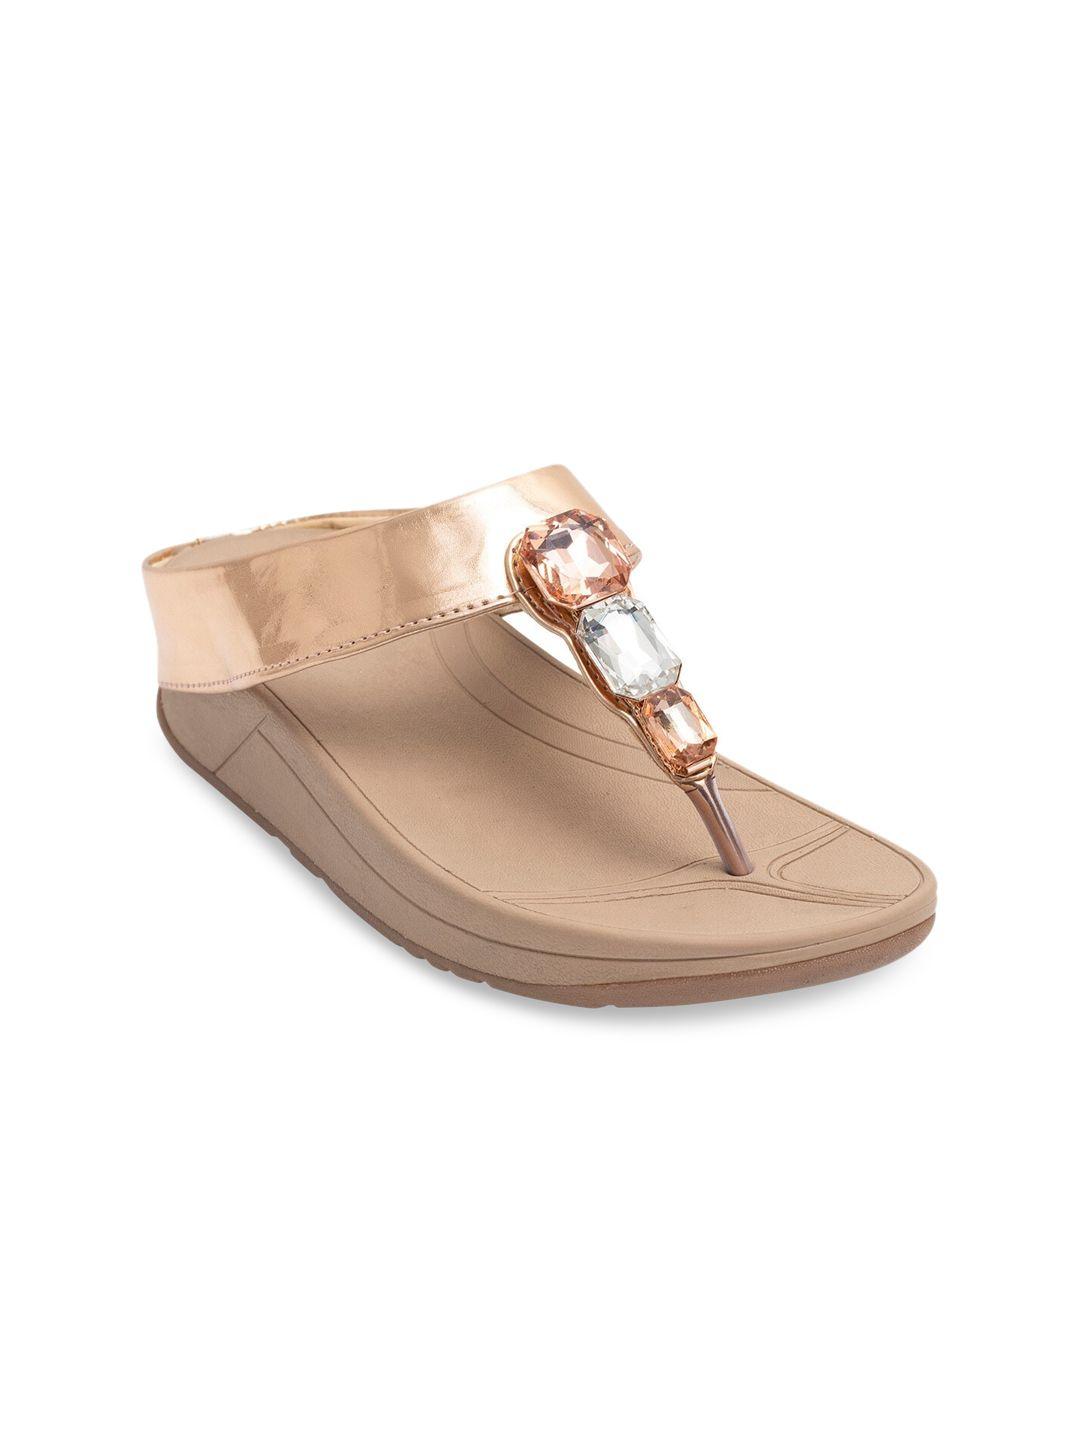 zyla rose gold wedge sandals